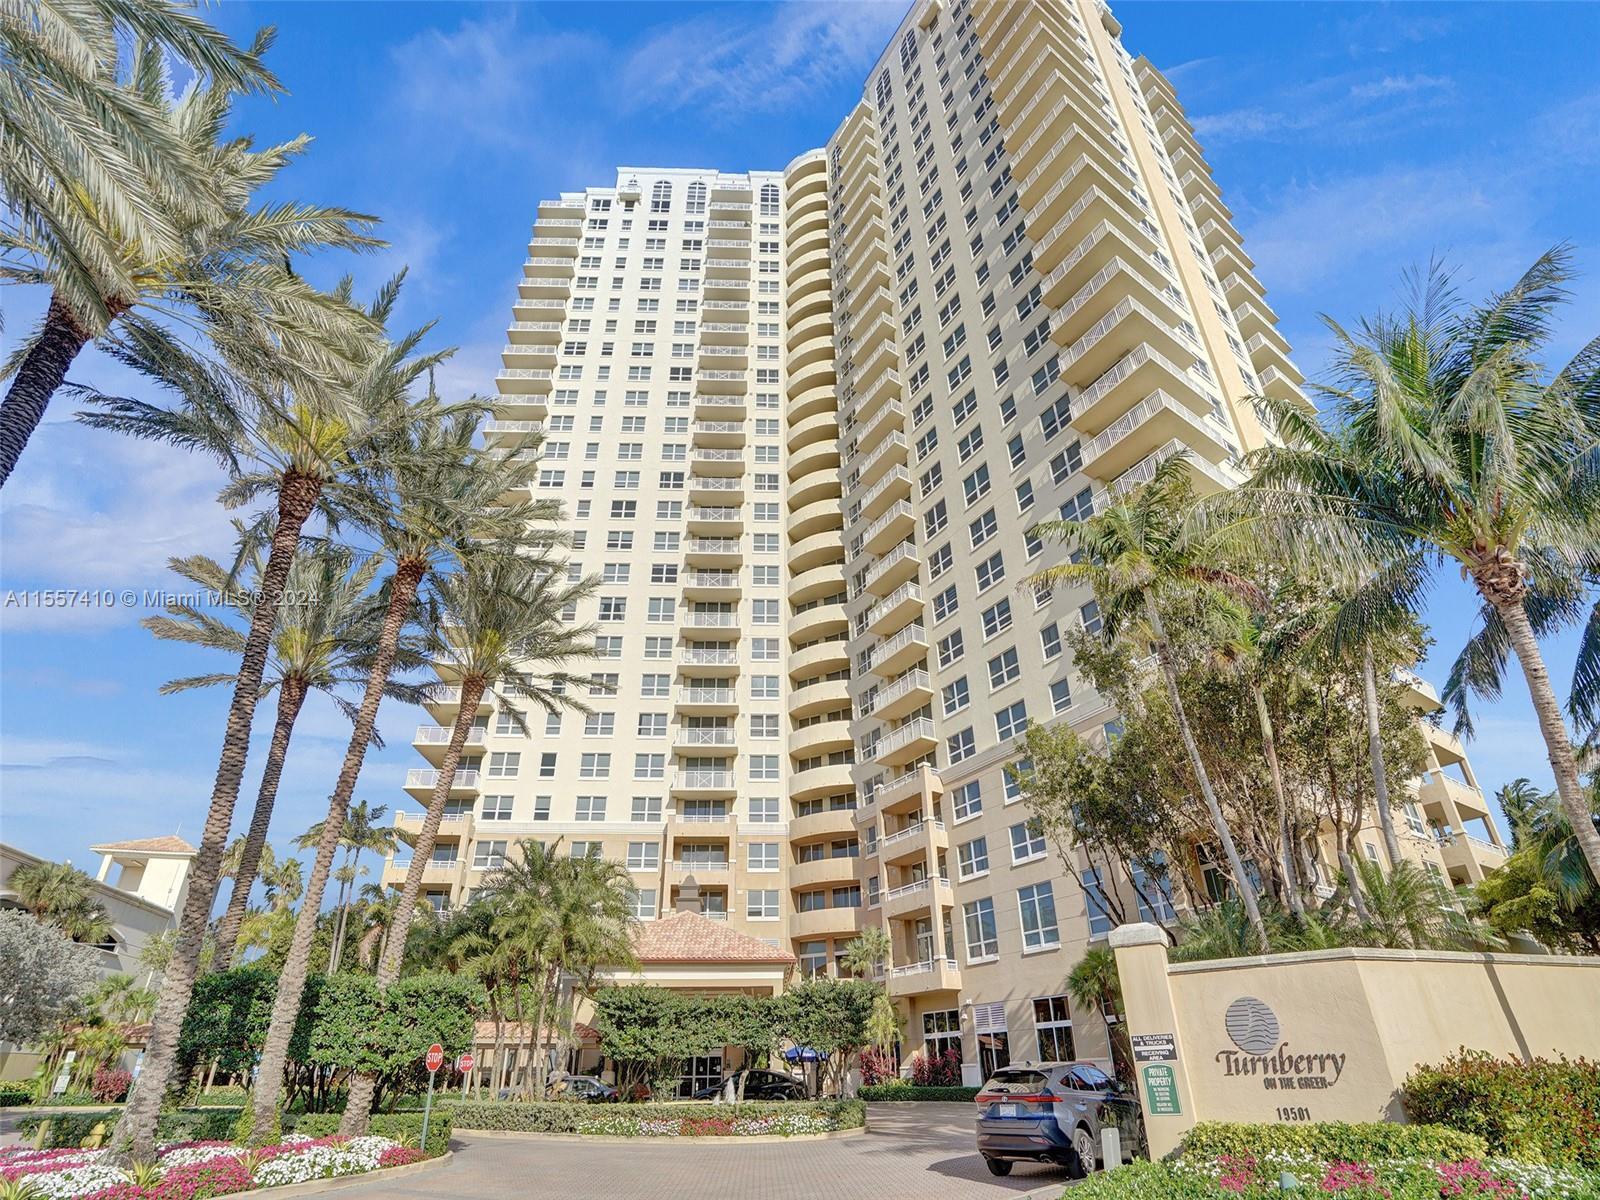 Photo of 19501 W Country Club Dr #1715 in Aventura, FL